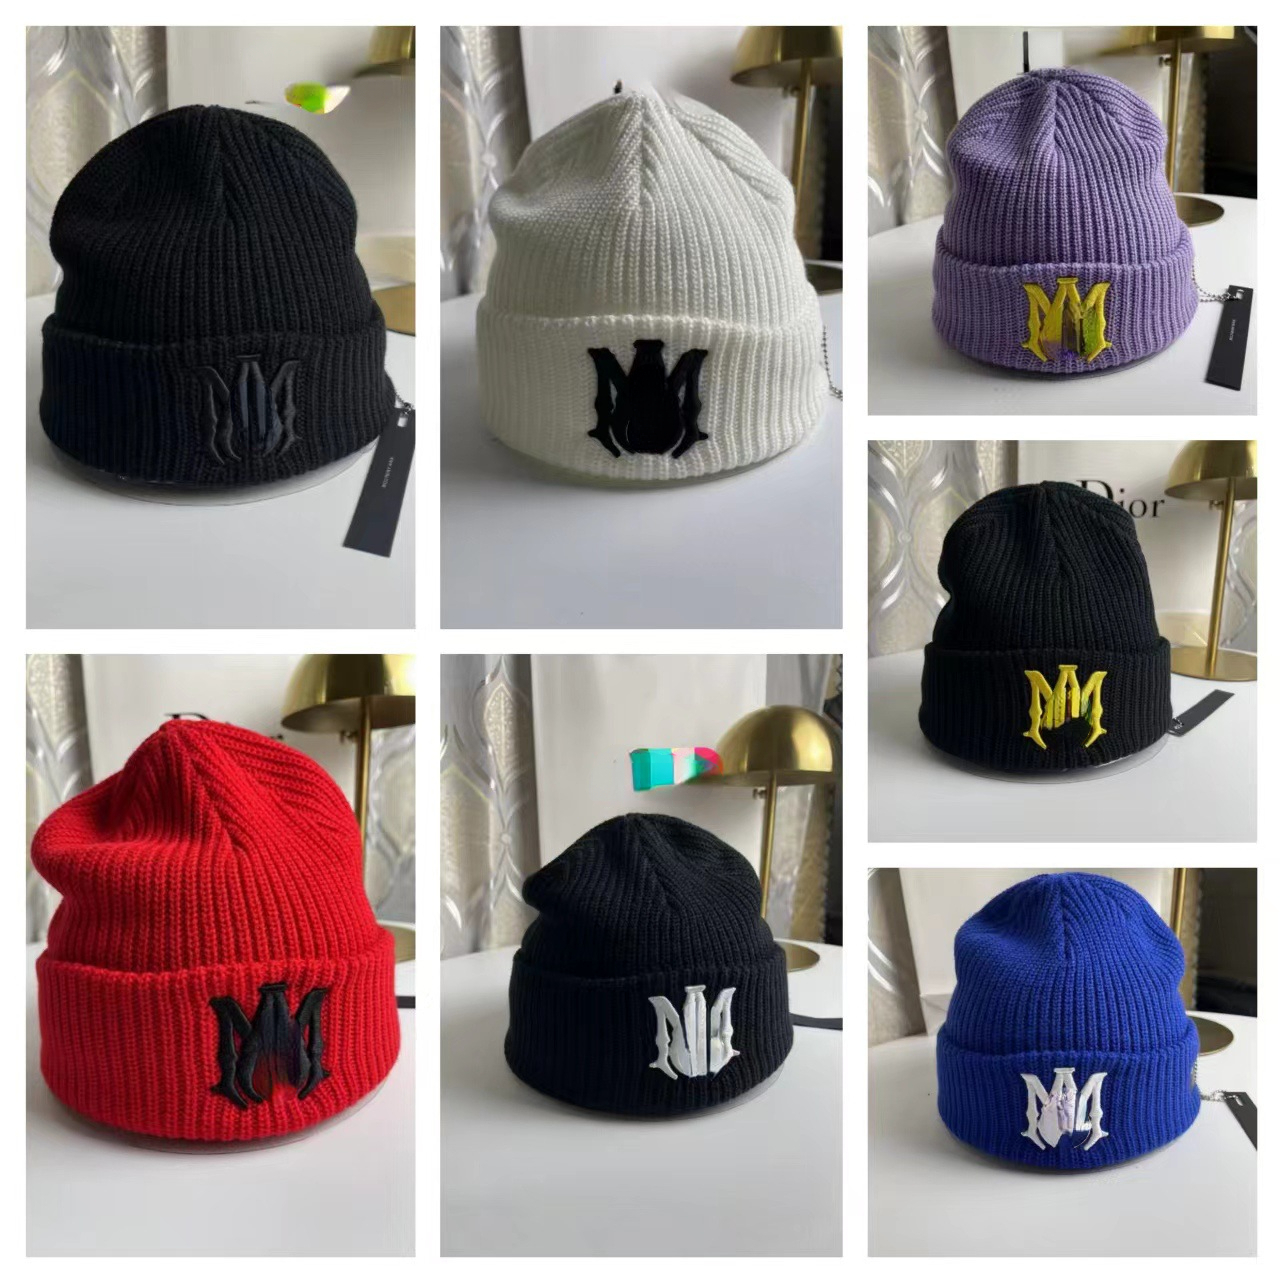 Classic Design Embroidery Knitted Hats Woolen Hood Beanies Cotton Men Casual Skull Caps273S